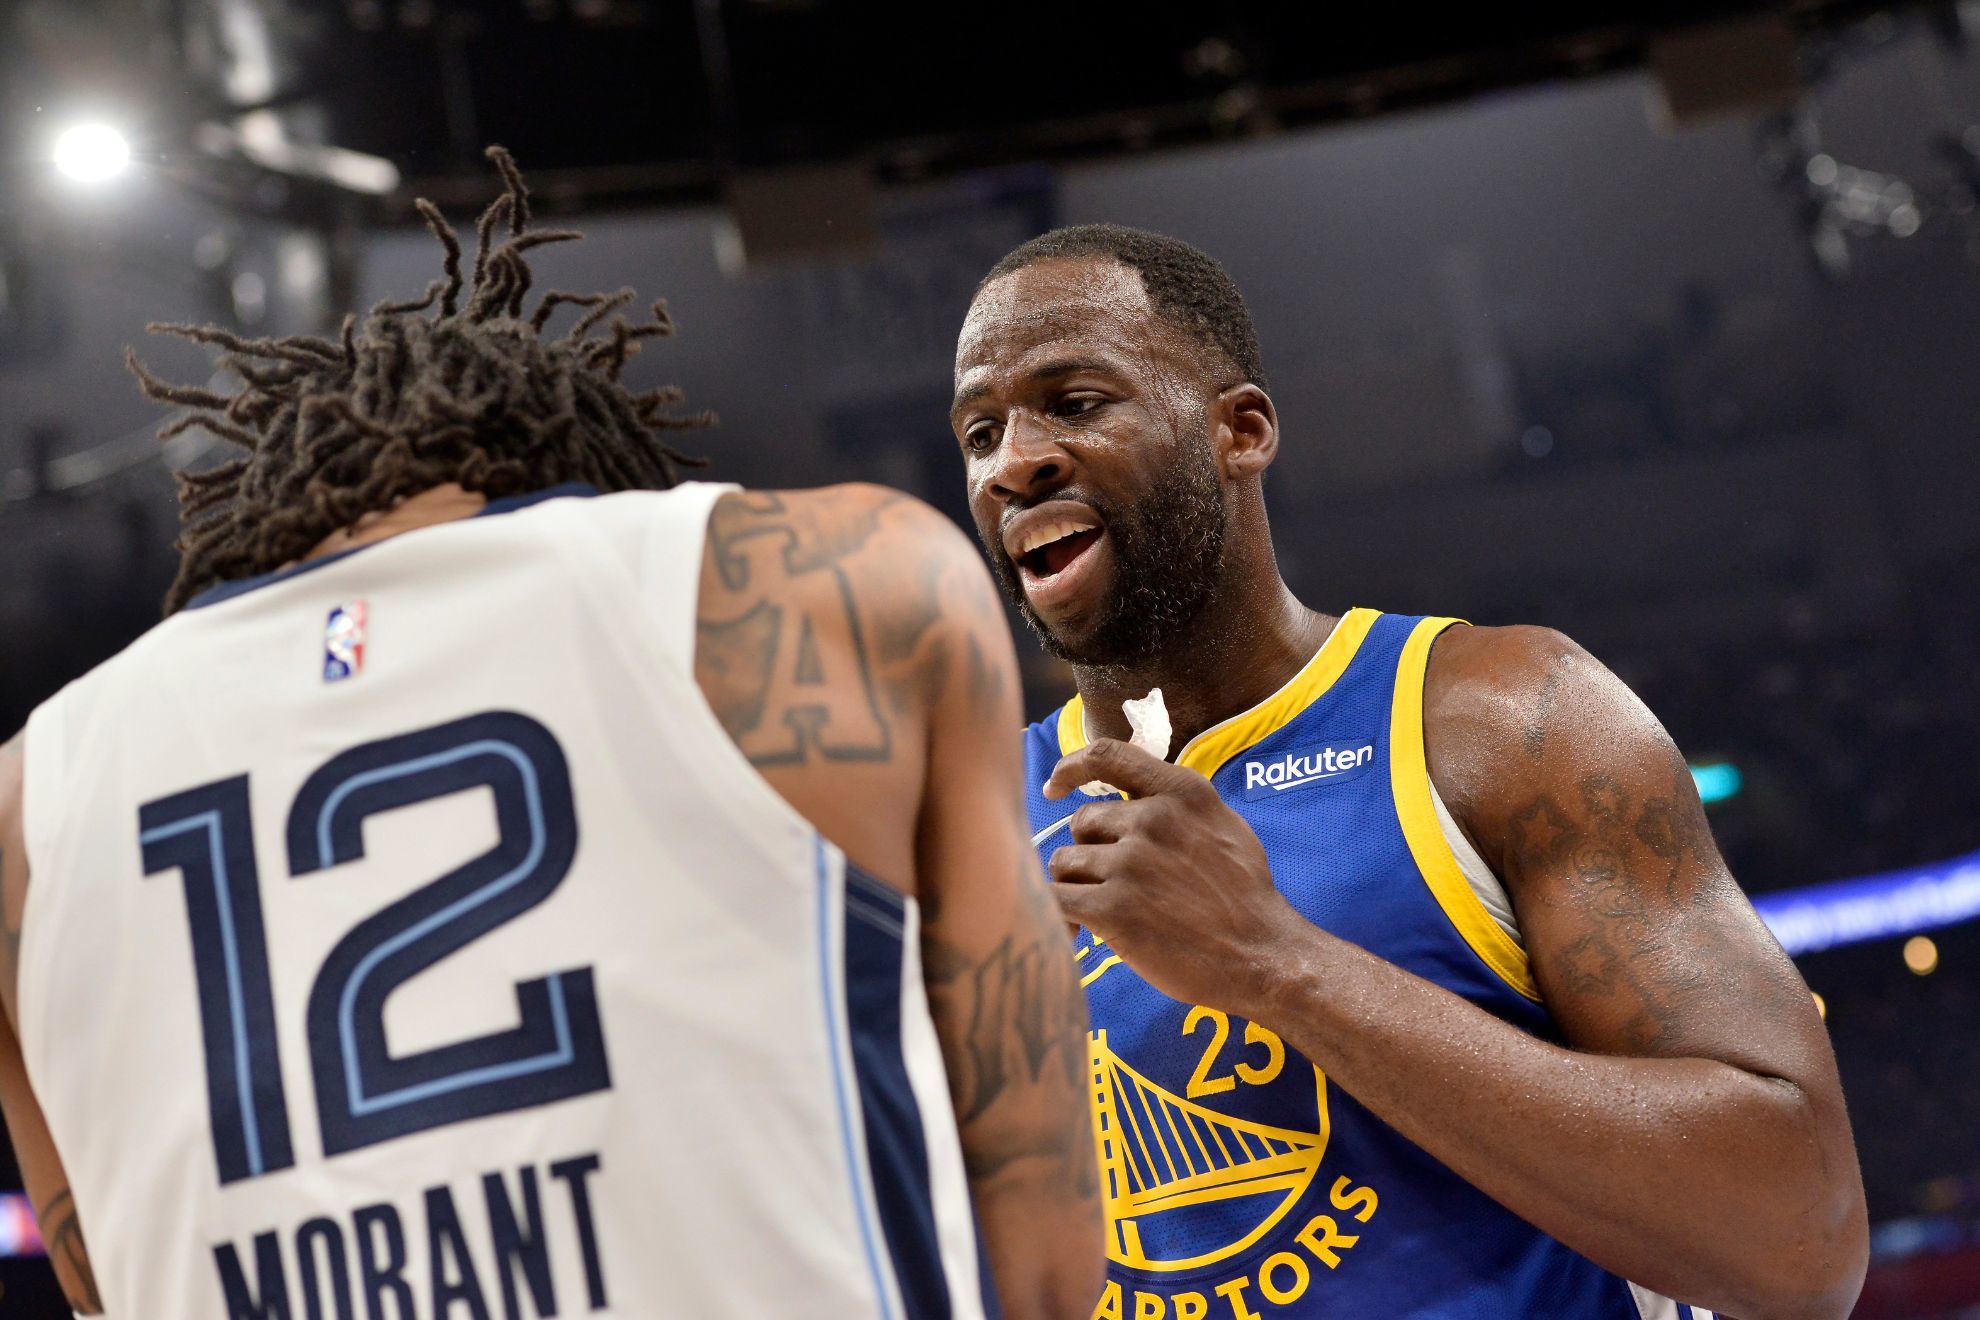 Draymond Green stands up for Ja Morant after Adin Ross calls for arrest